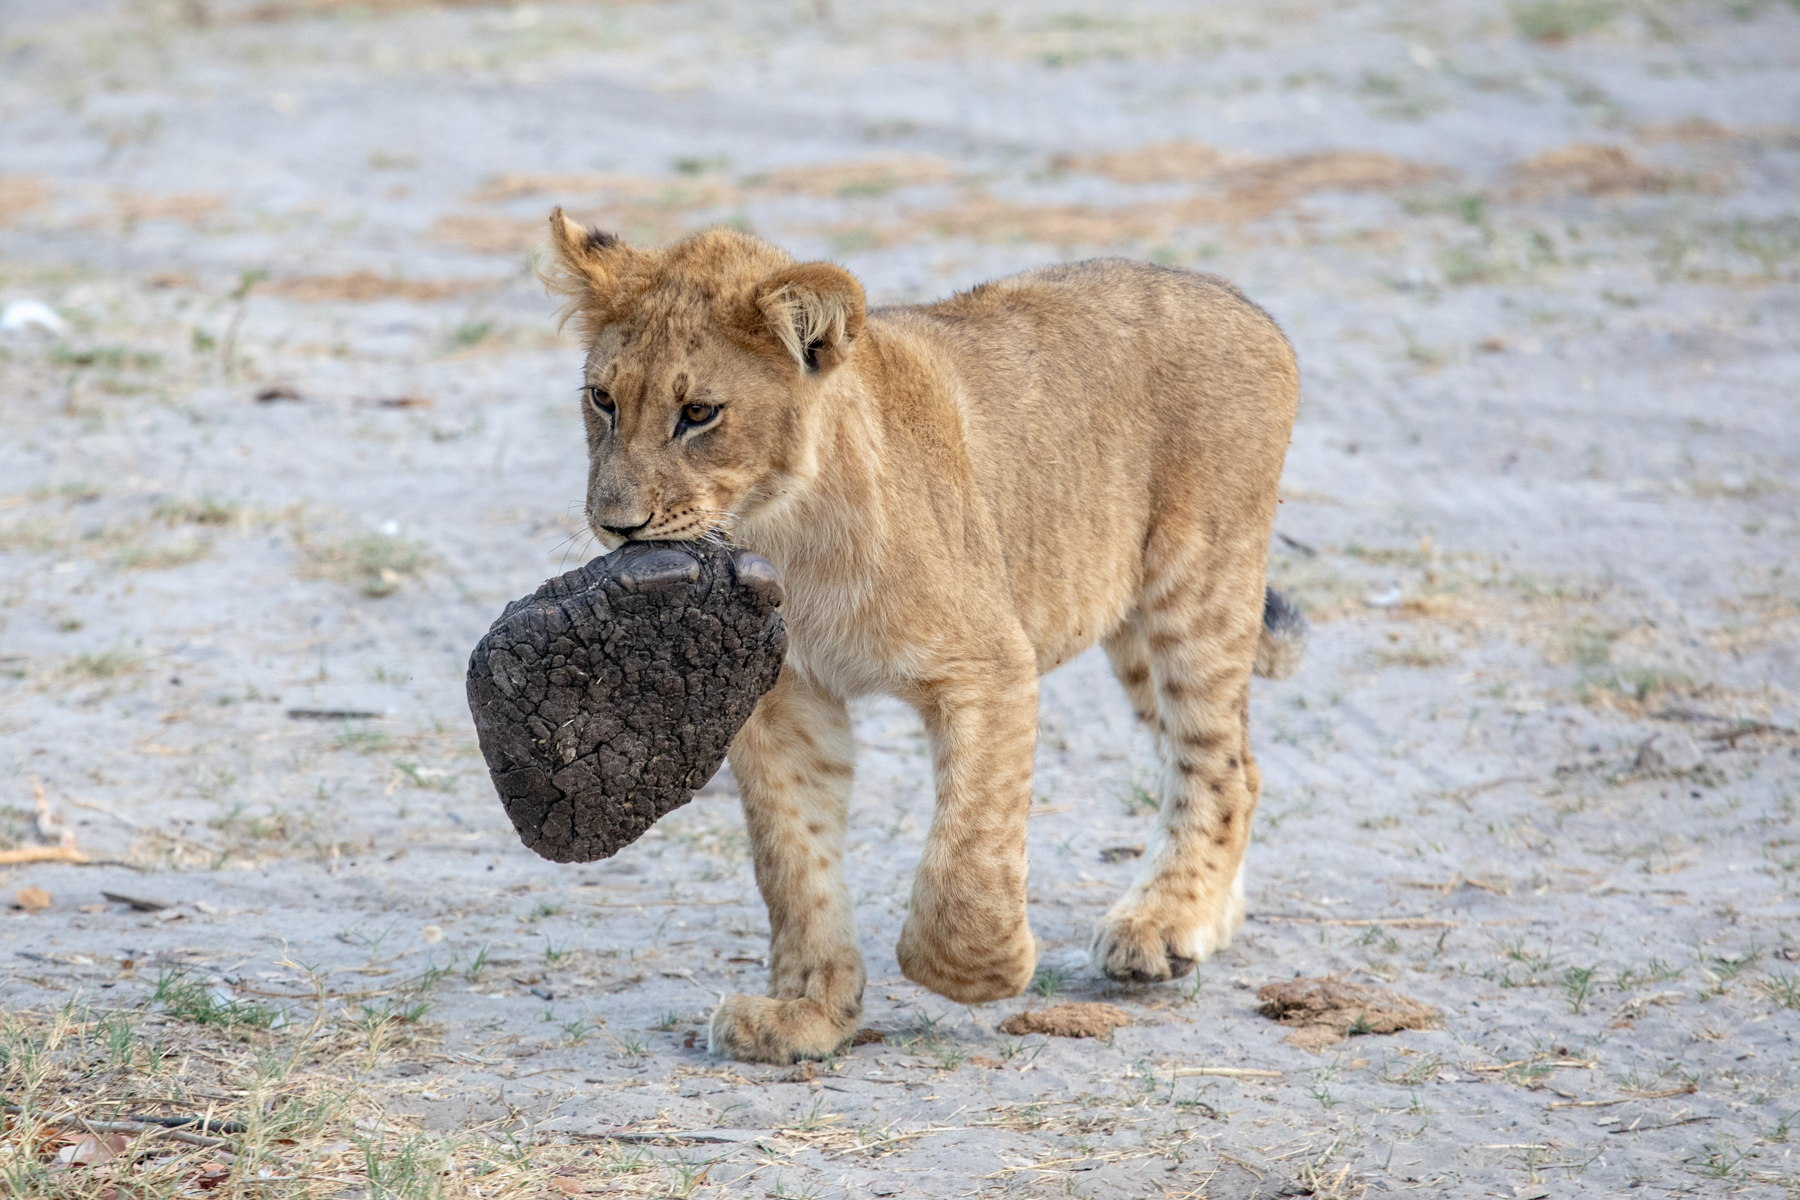 Lion cub with a baby elephant's foot, a decidely macarbre 'plaything'